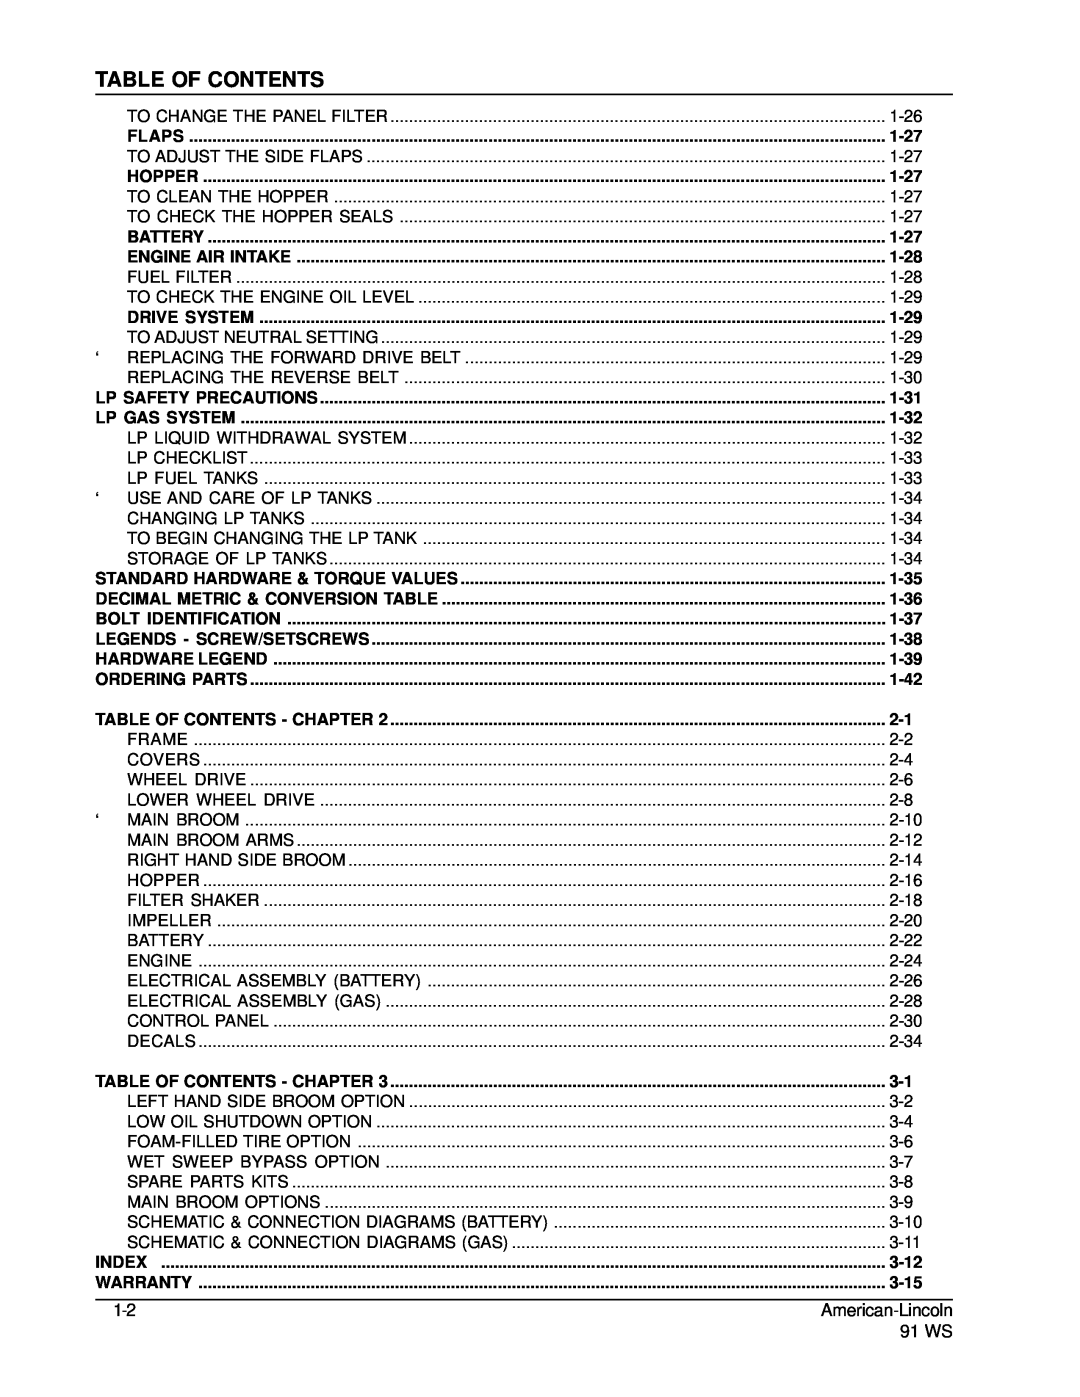 Nilfisk-ALTO 91WS manual Table Of Contents, 1-27, 1-28, 1-29, 1-31, 1-32, 1-35, 1-36, 1-37, 1-38, 1-39, 1-42, 3-12, 3-15 